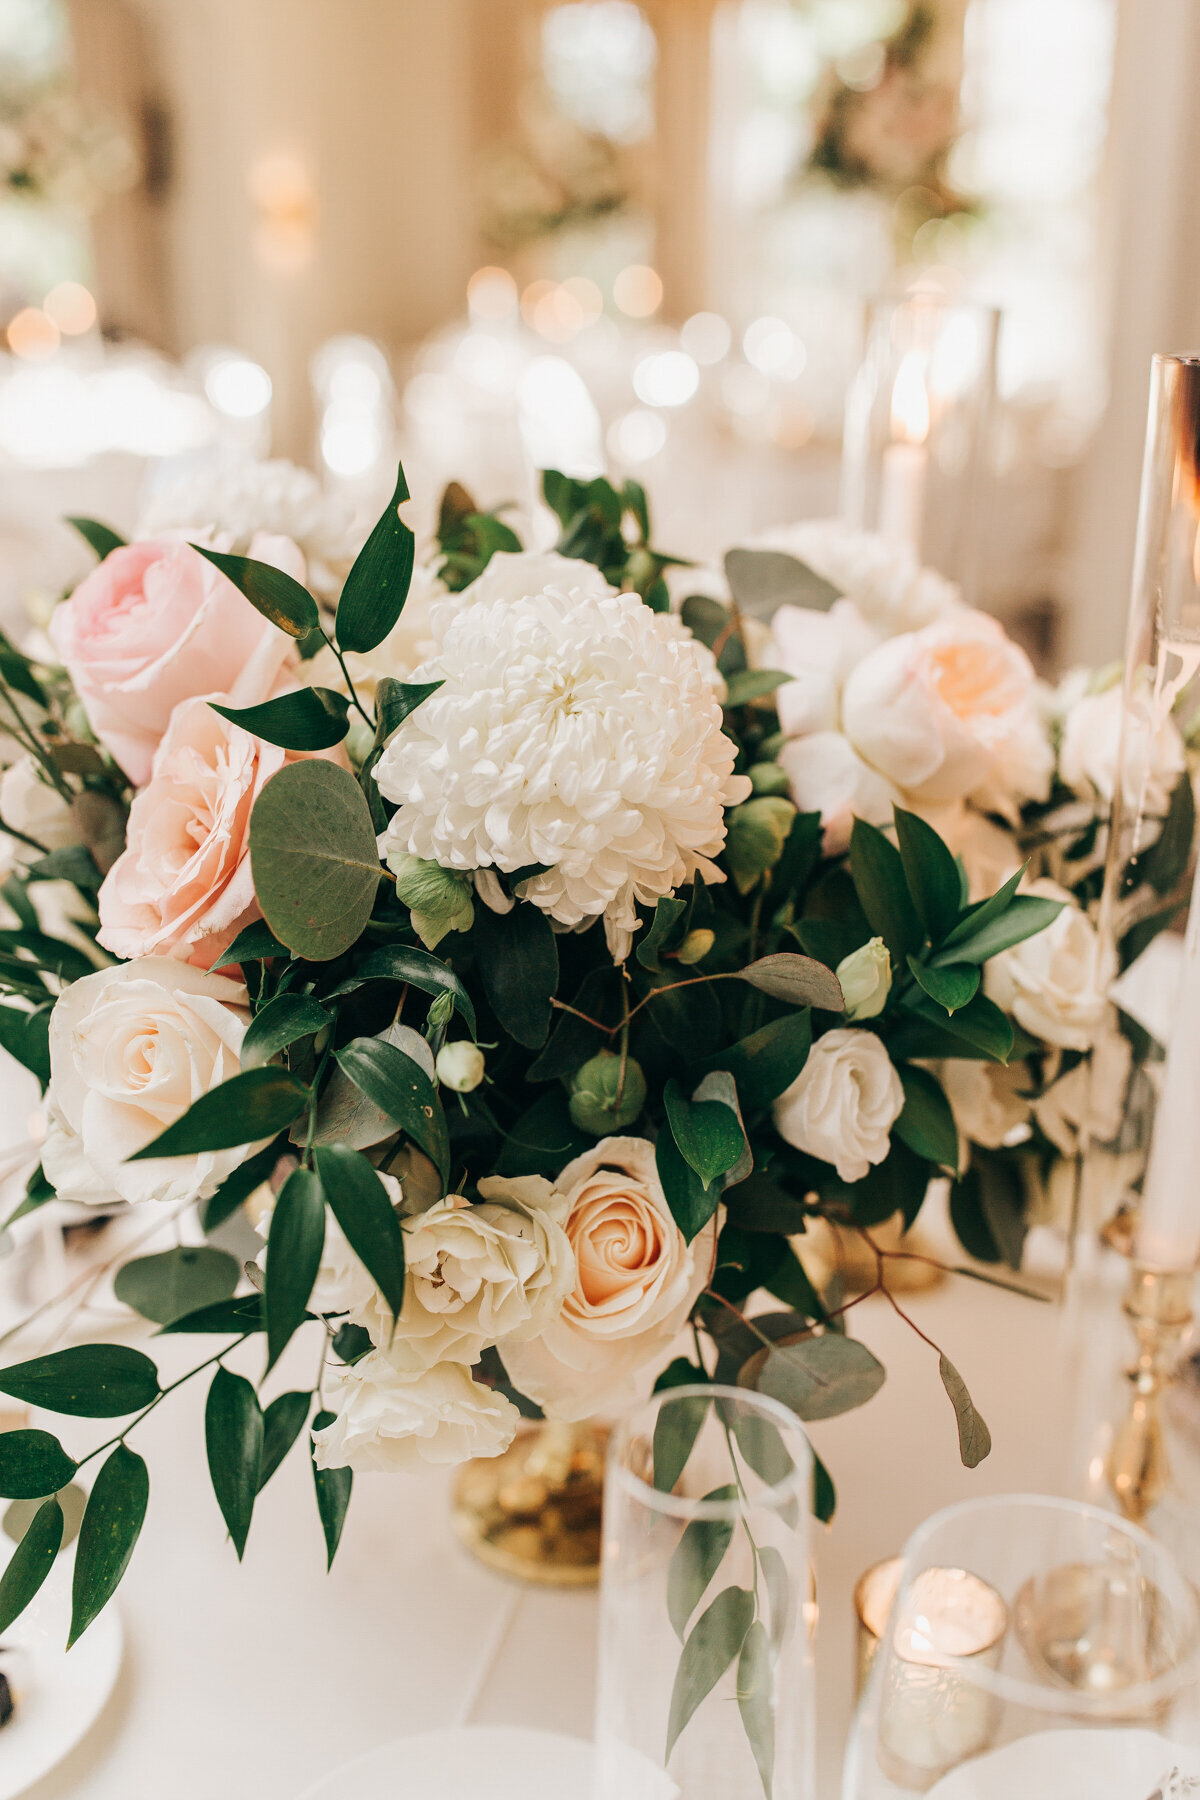 Eucalyptus, roses, and chrysanthemums in luxurious wedding centre pieces